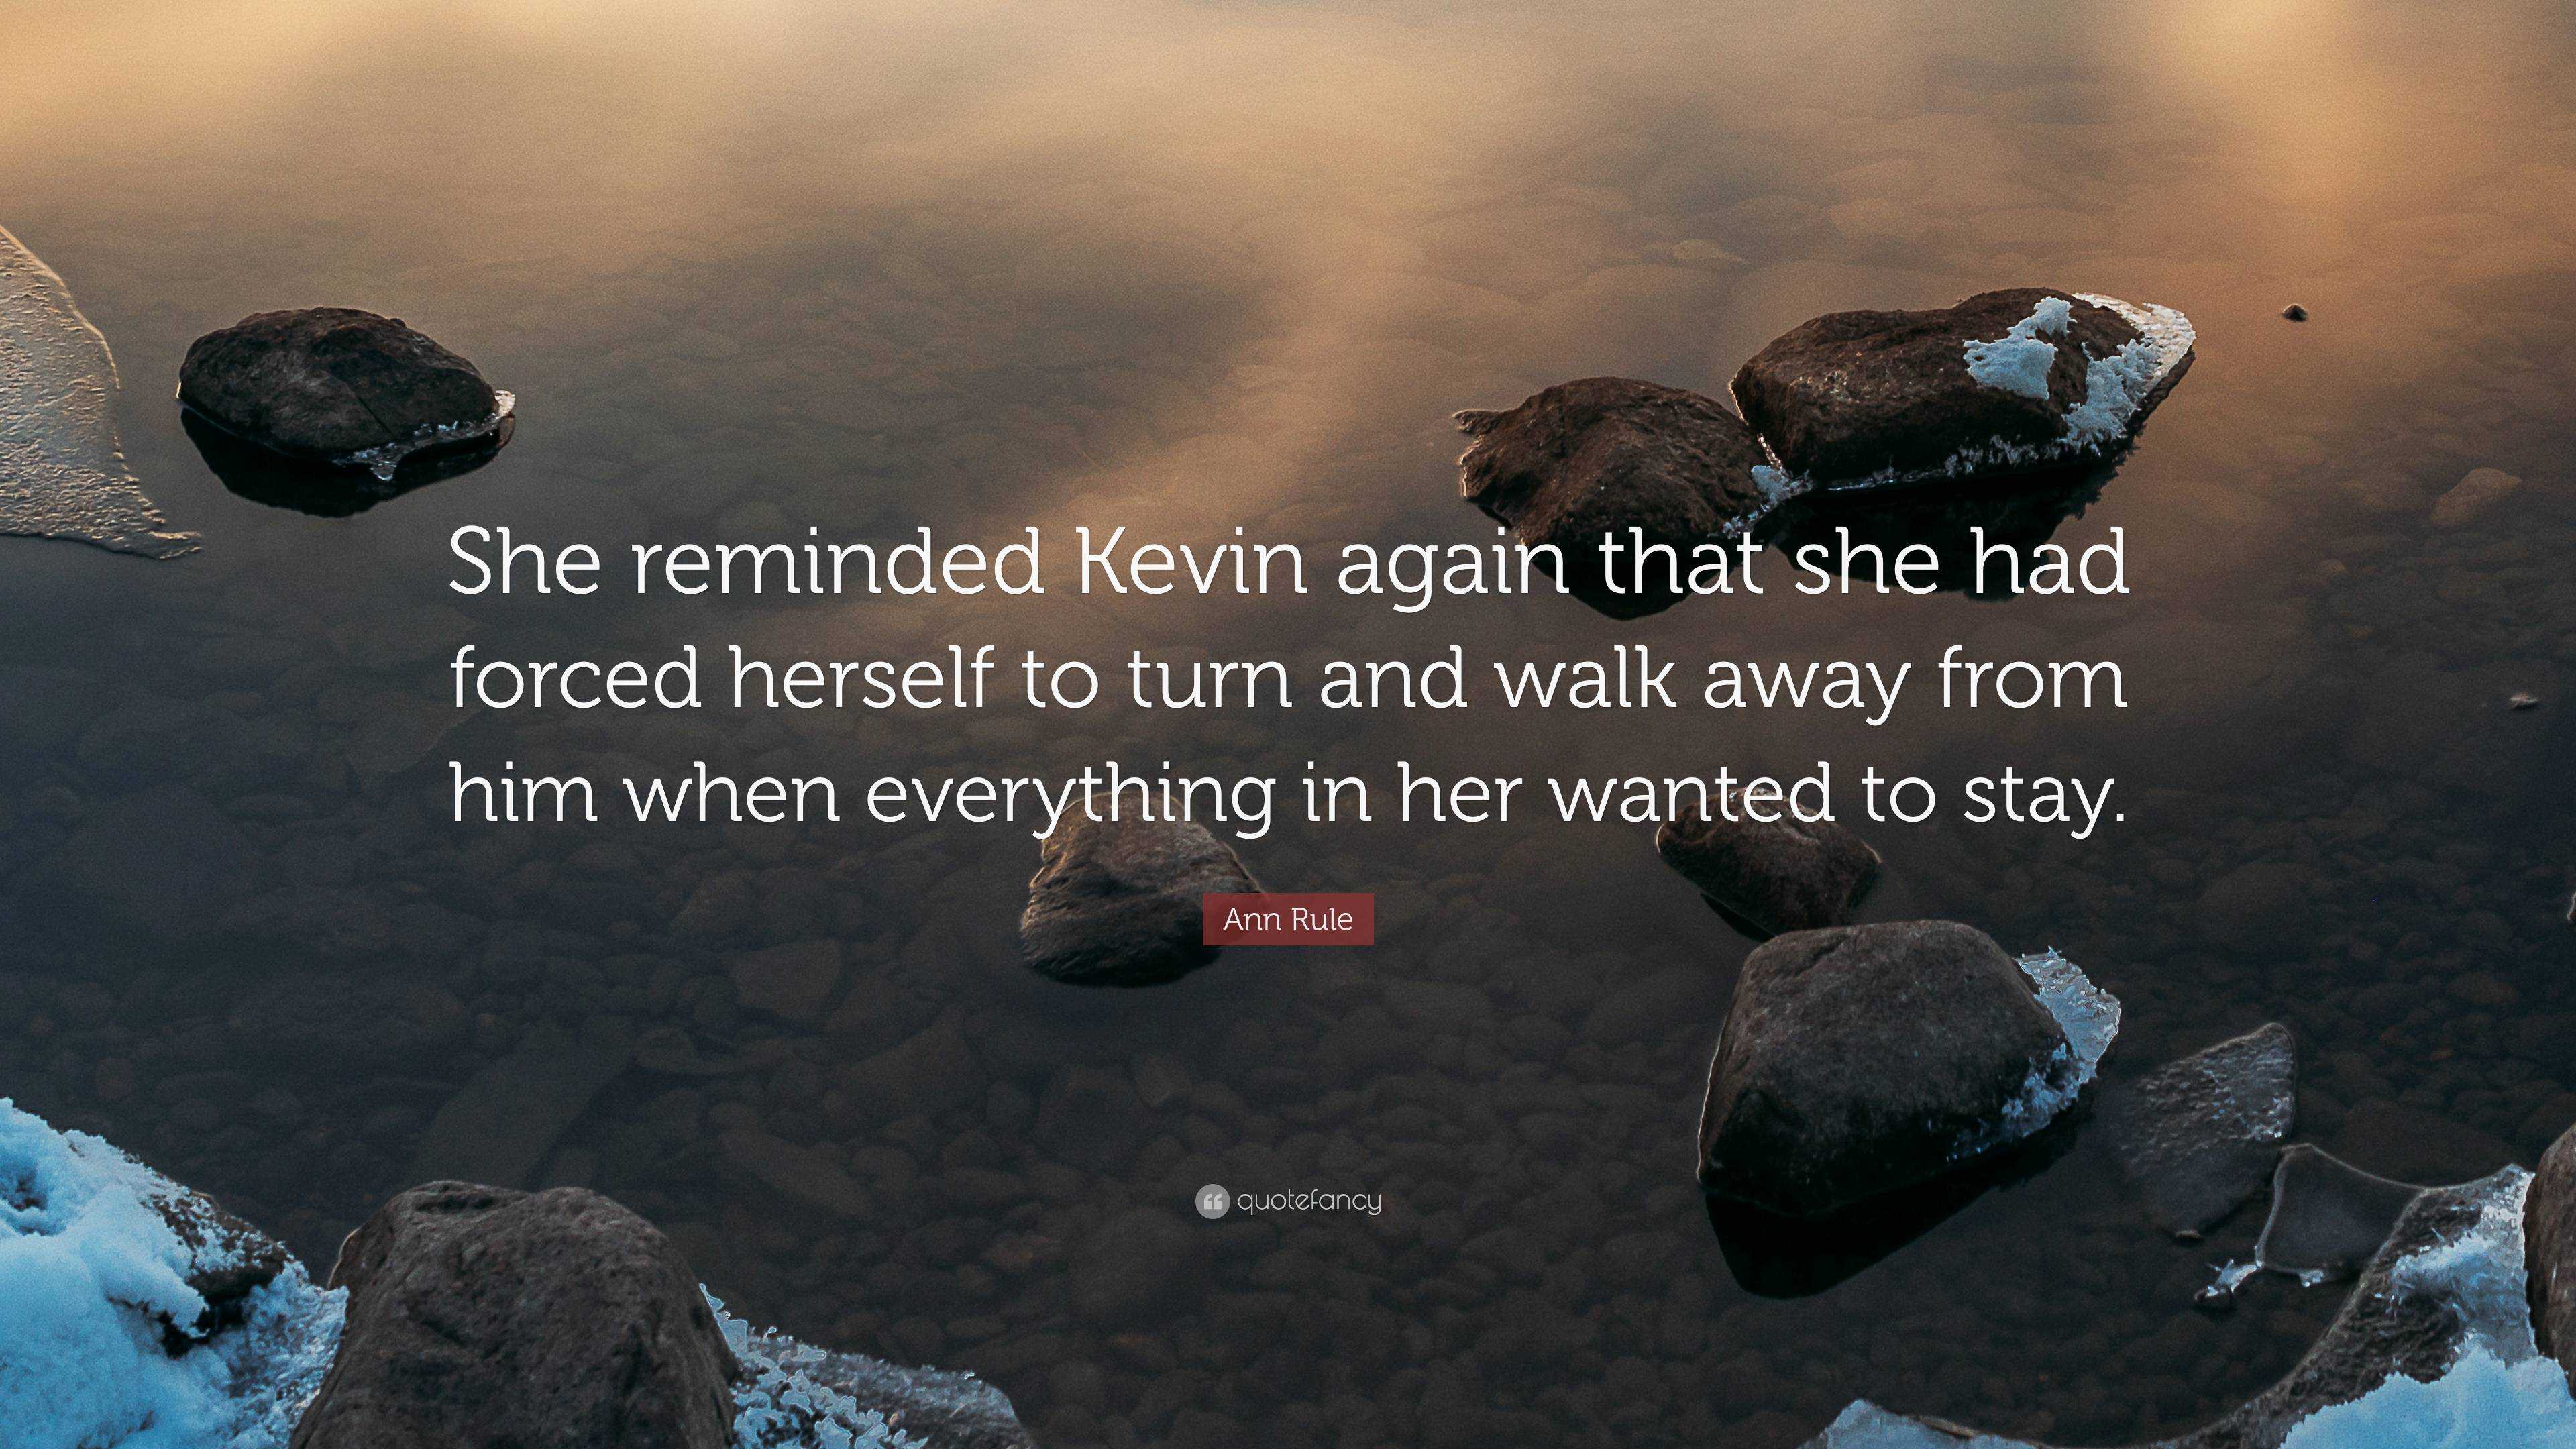 Ann Rule Quote: “She reminded Kevin again that she had forced herself ...